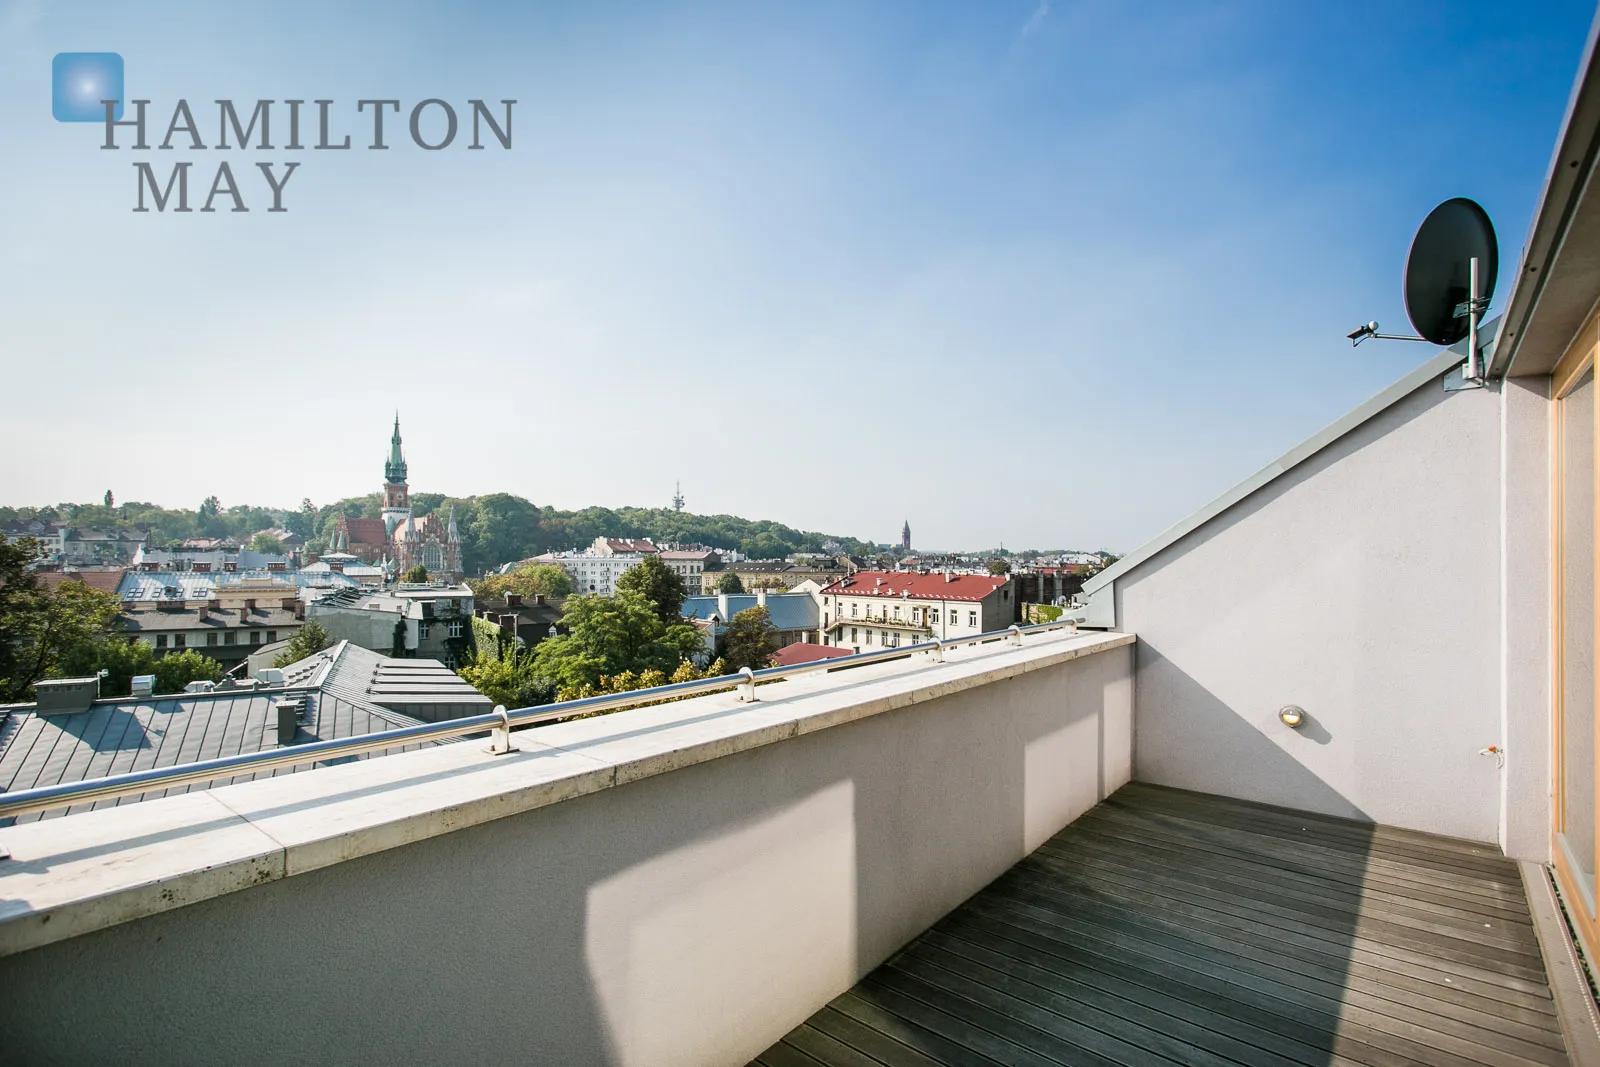 Luxurious, three bedroom apartment with a view over Vistula